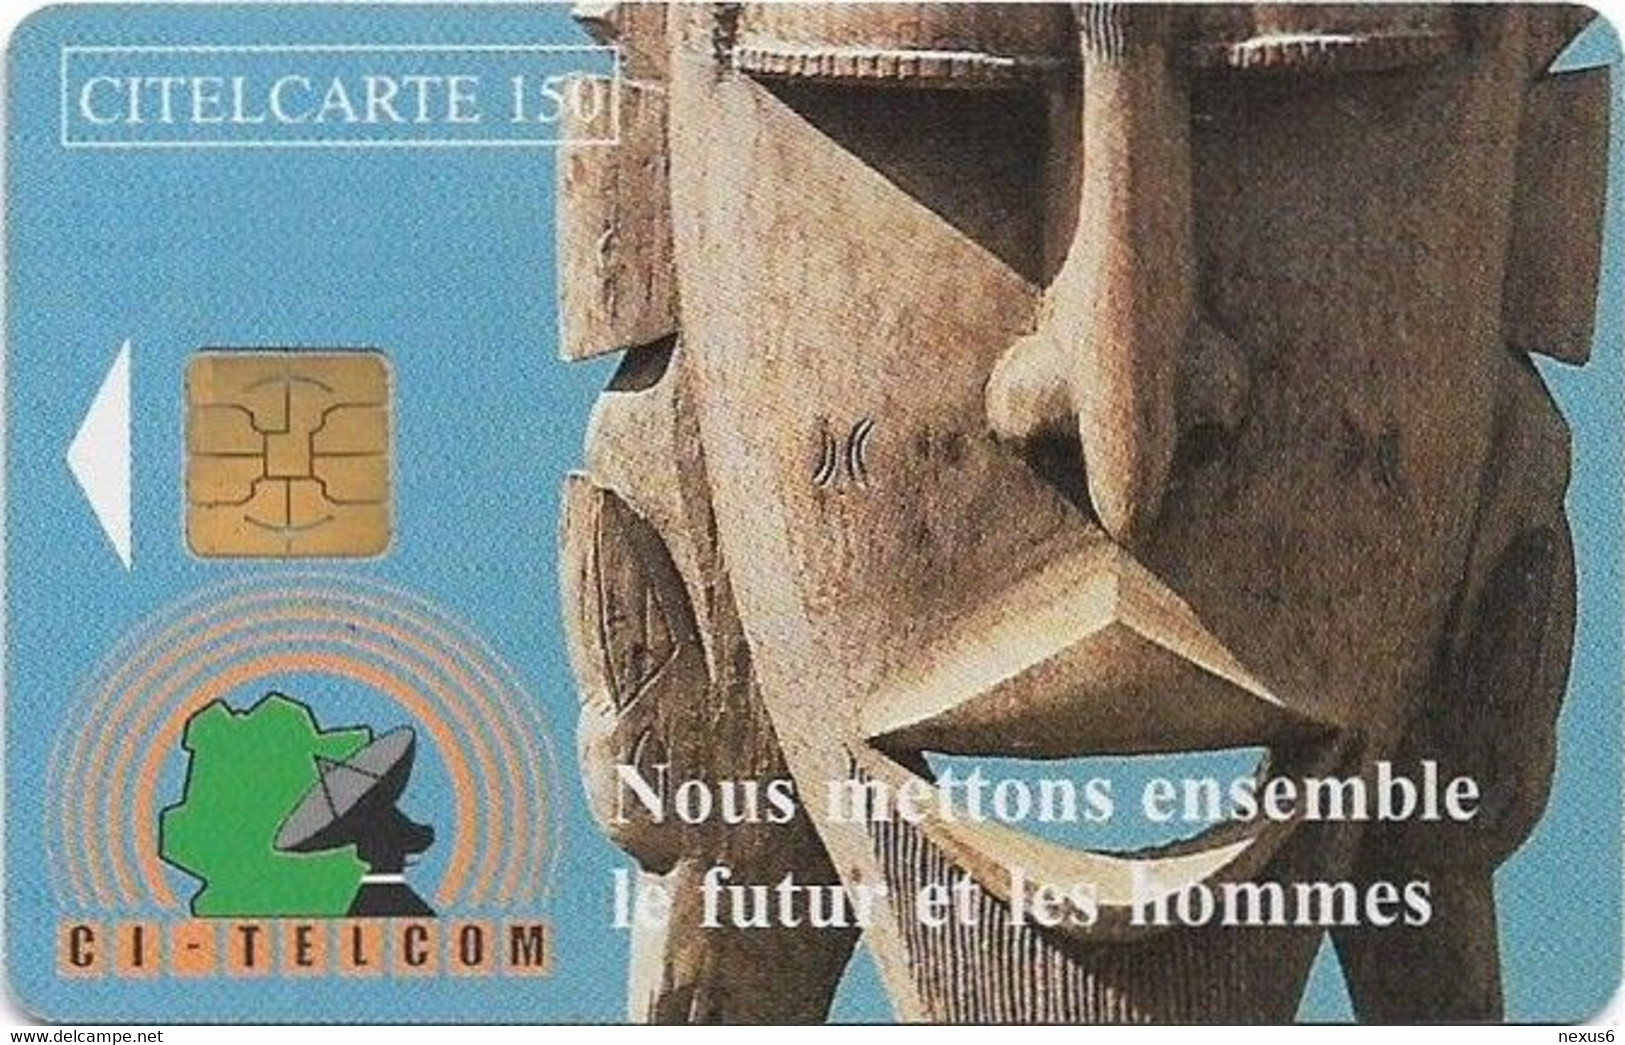 Ivory Coast - CI-Telcom - Carved Mask, Chip Philips, 150Units, 25.500ex, Used - Côte D'Ivoire